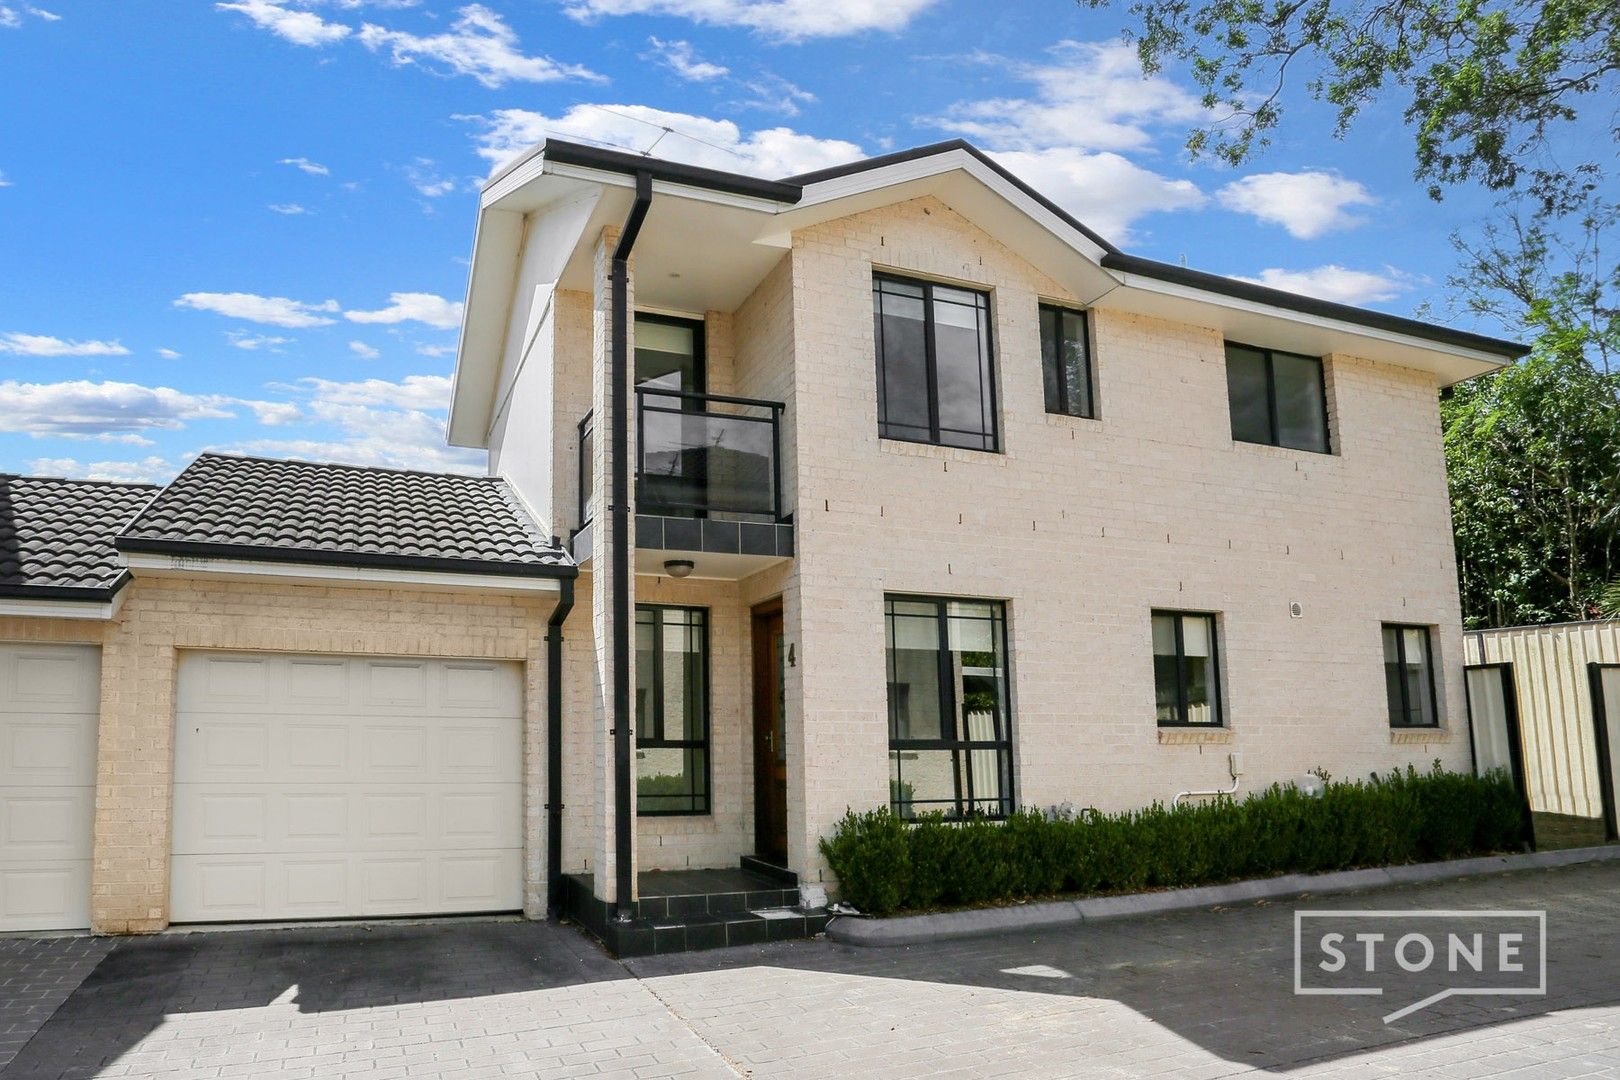 2 bedrooms Townhouse in  CASTLE HILL NSW, 2154